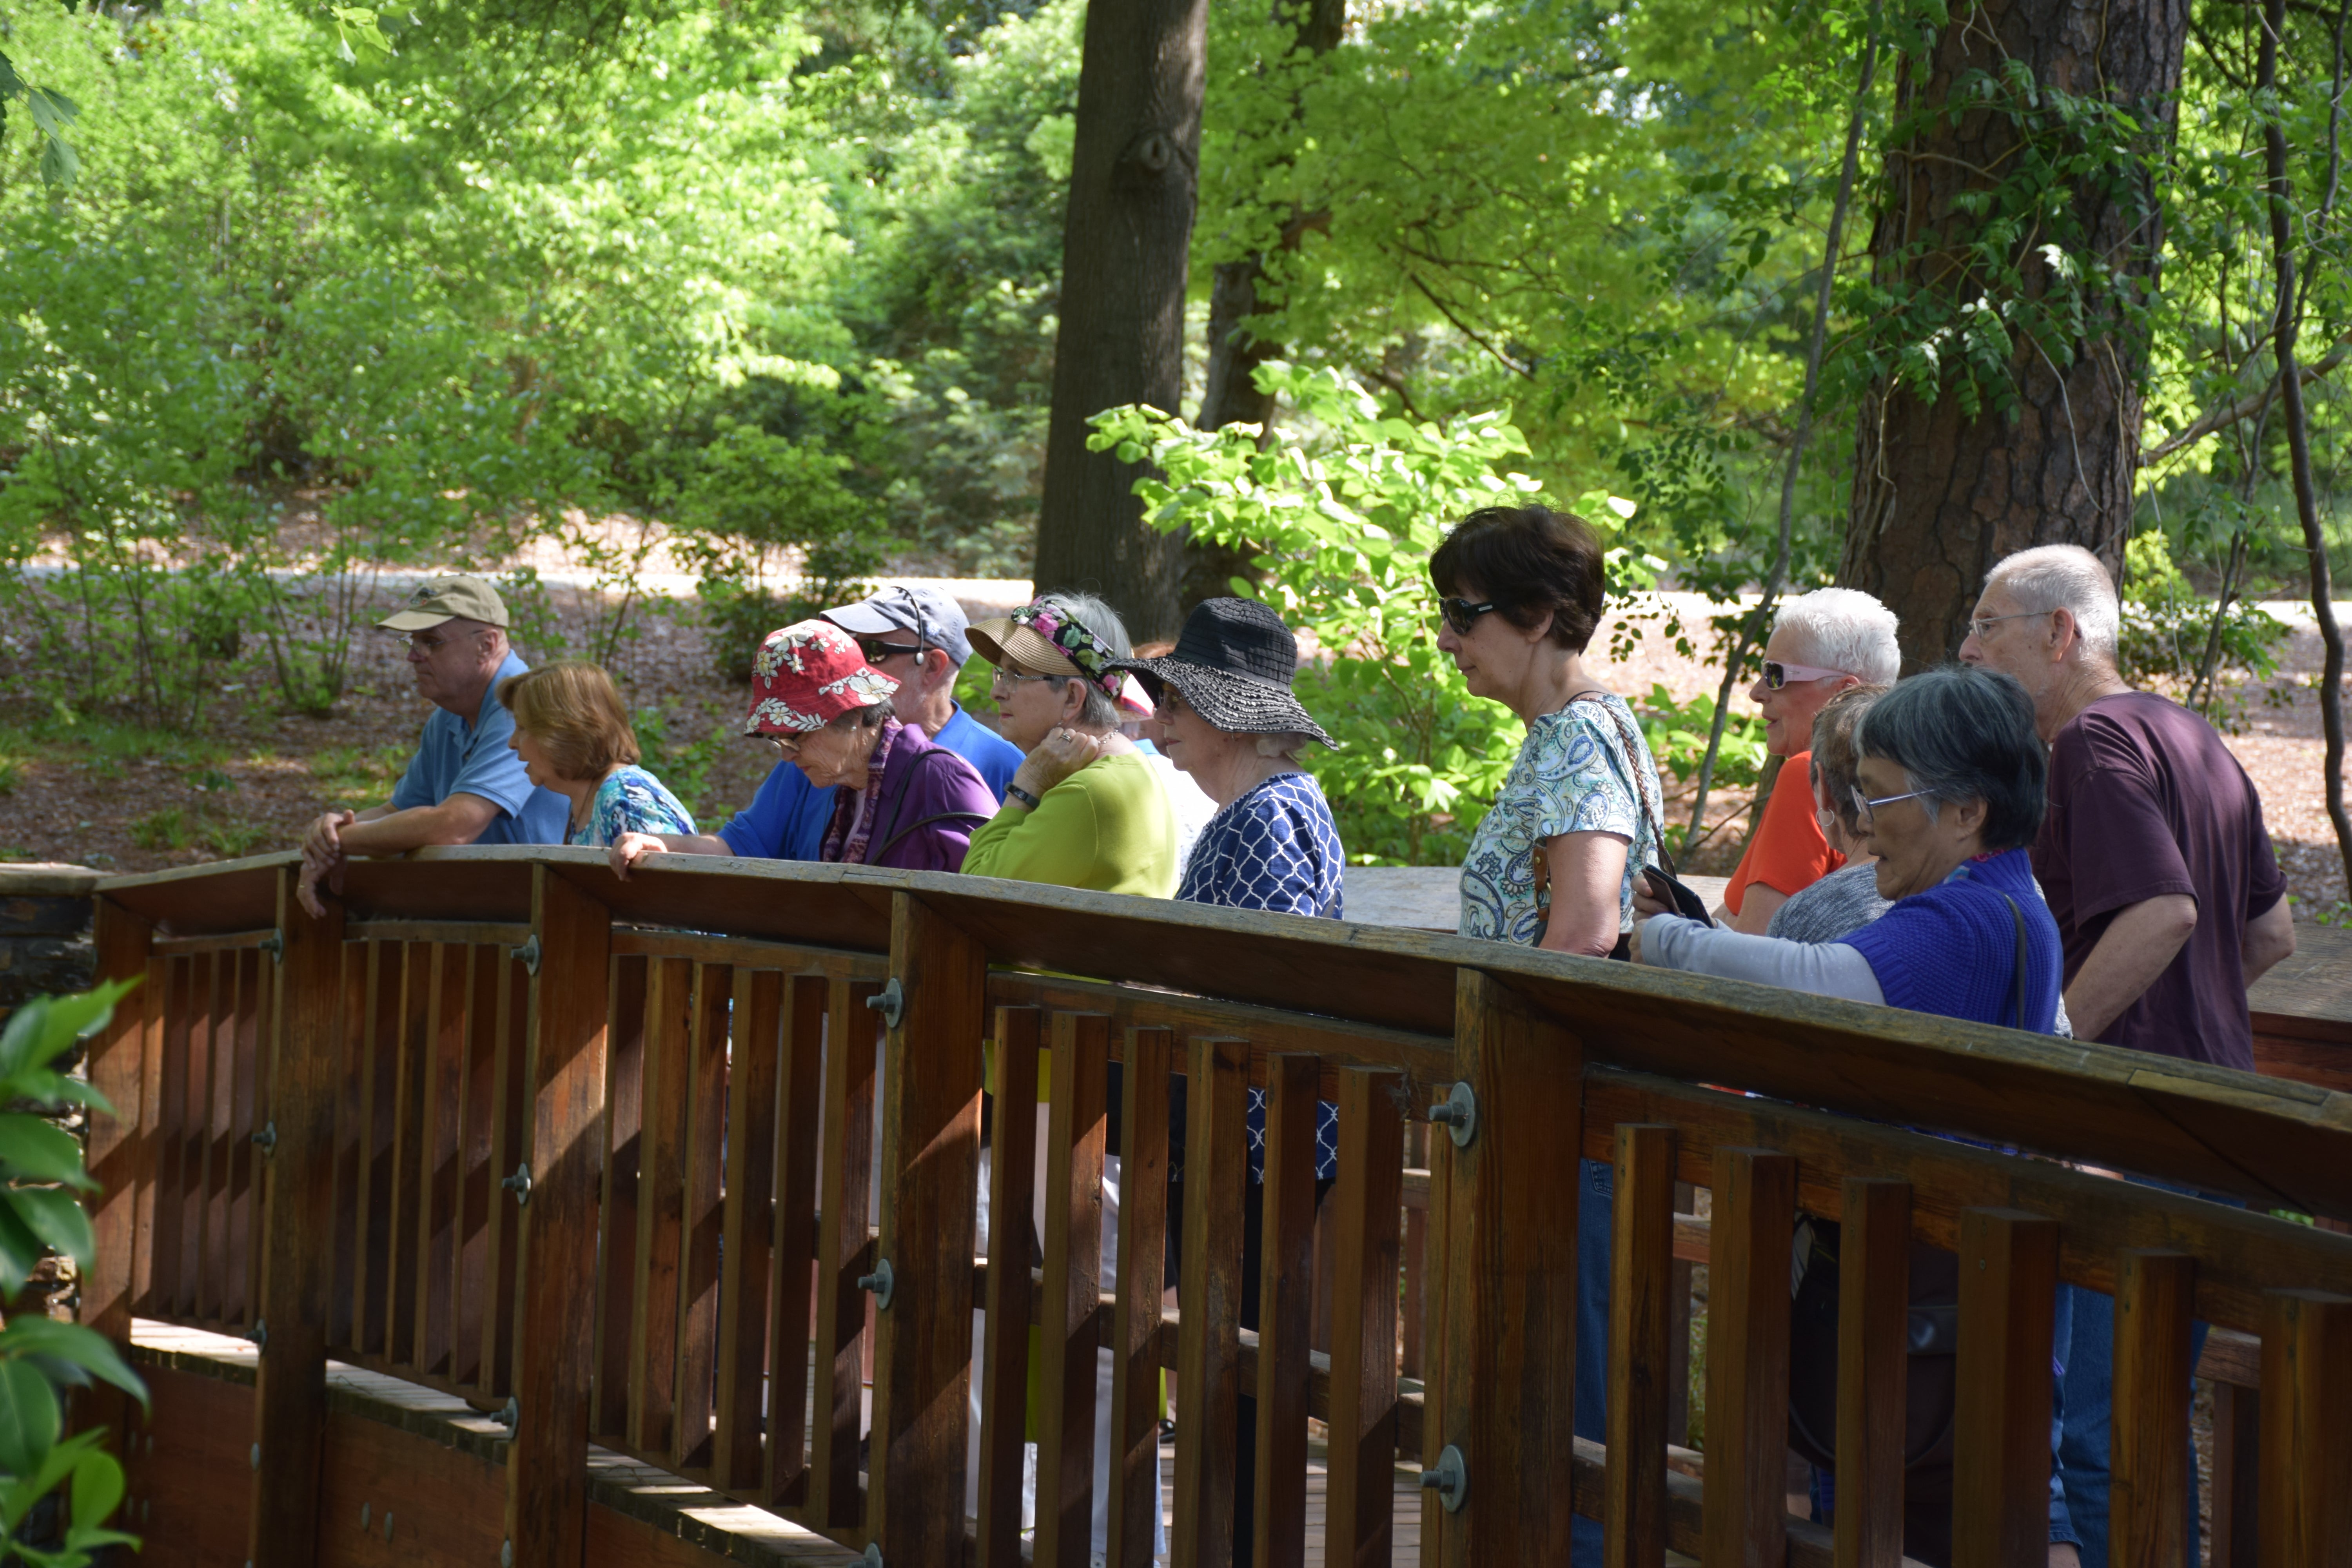 Image of LLP trip participants enjoying the view from the bridge on a trip to the Duke Gardens